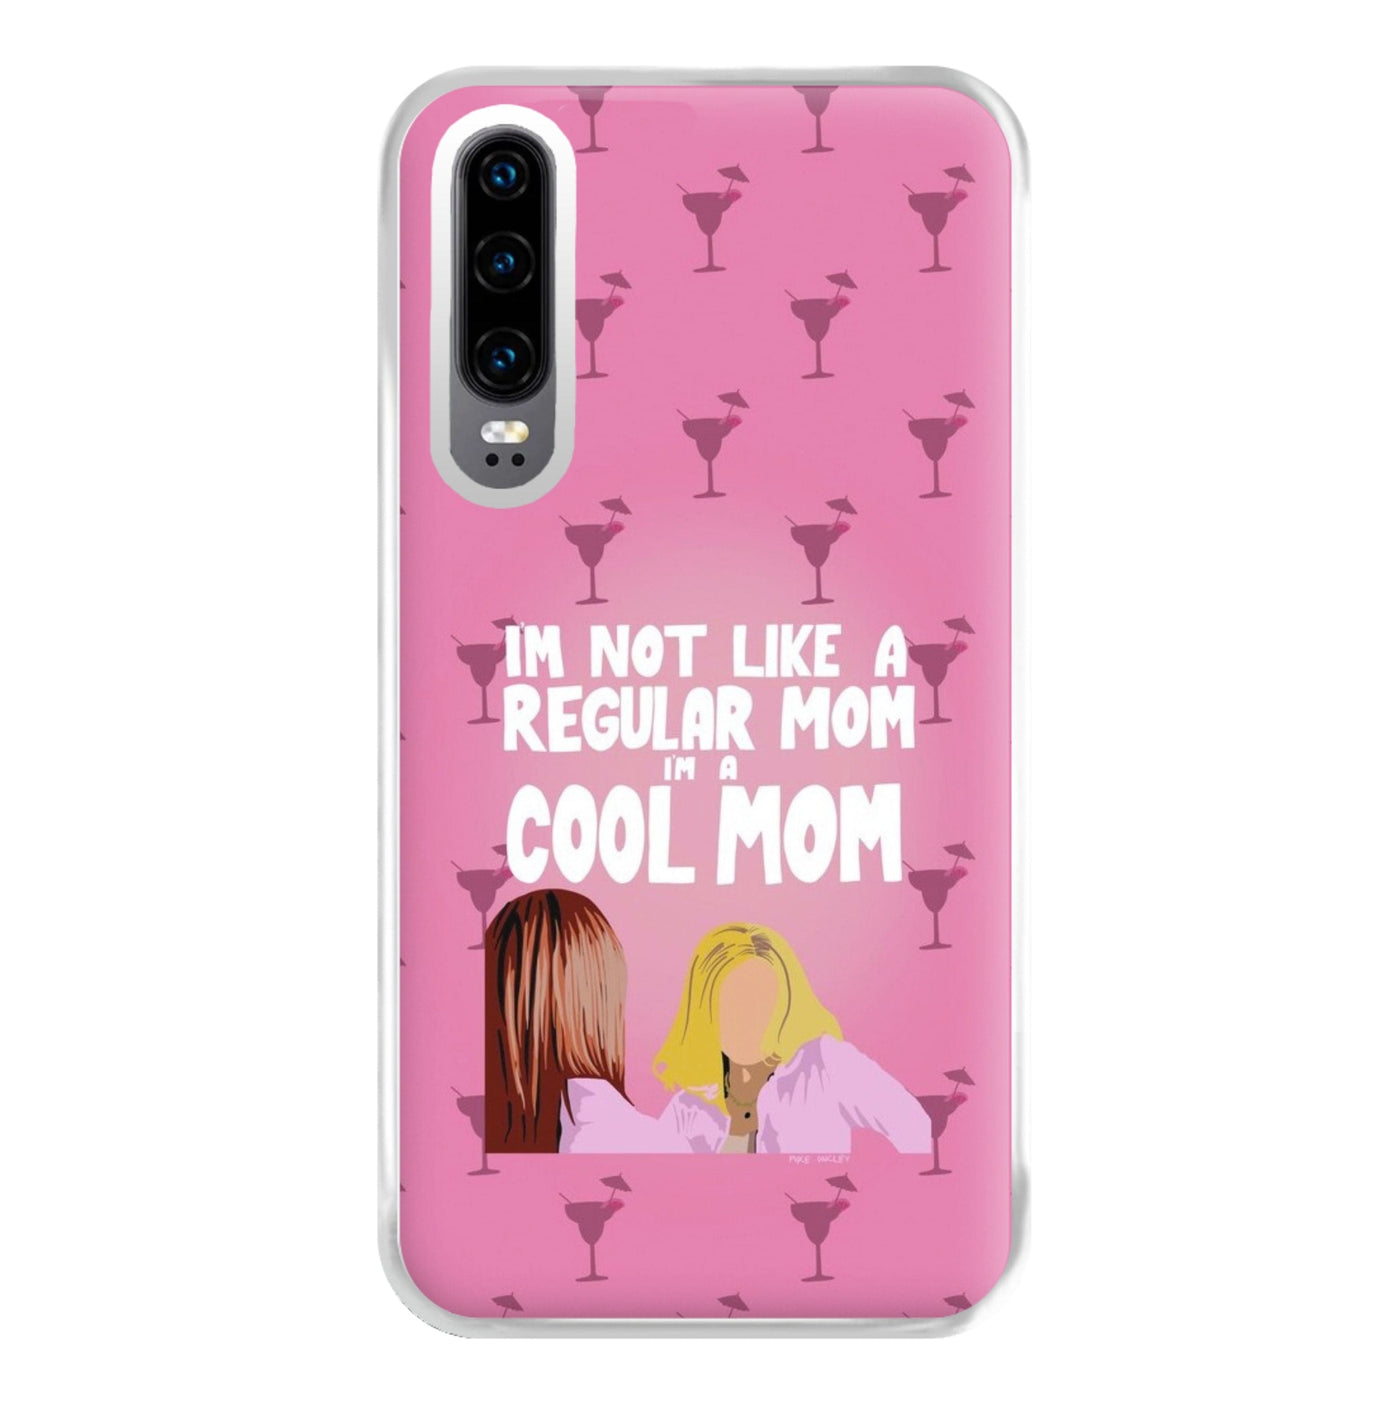 I'm A Cool Mom - Mean Girls Phone Case